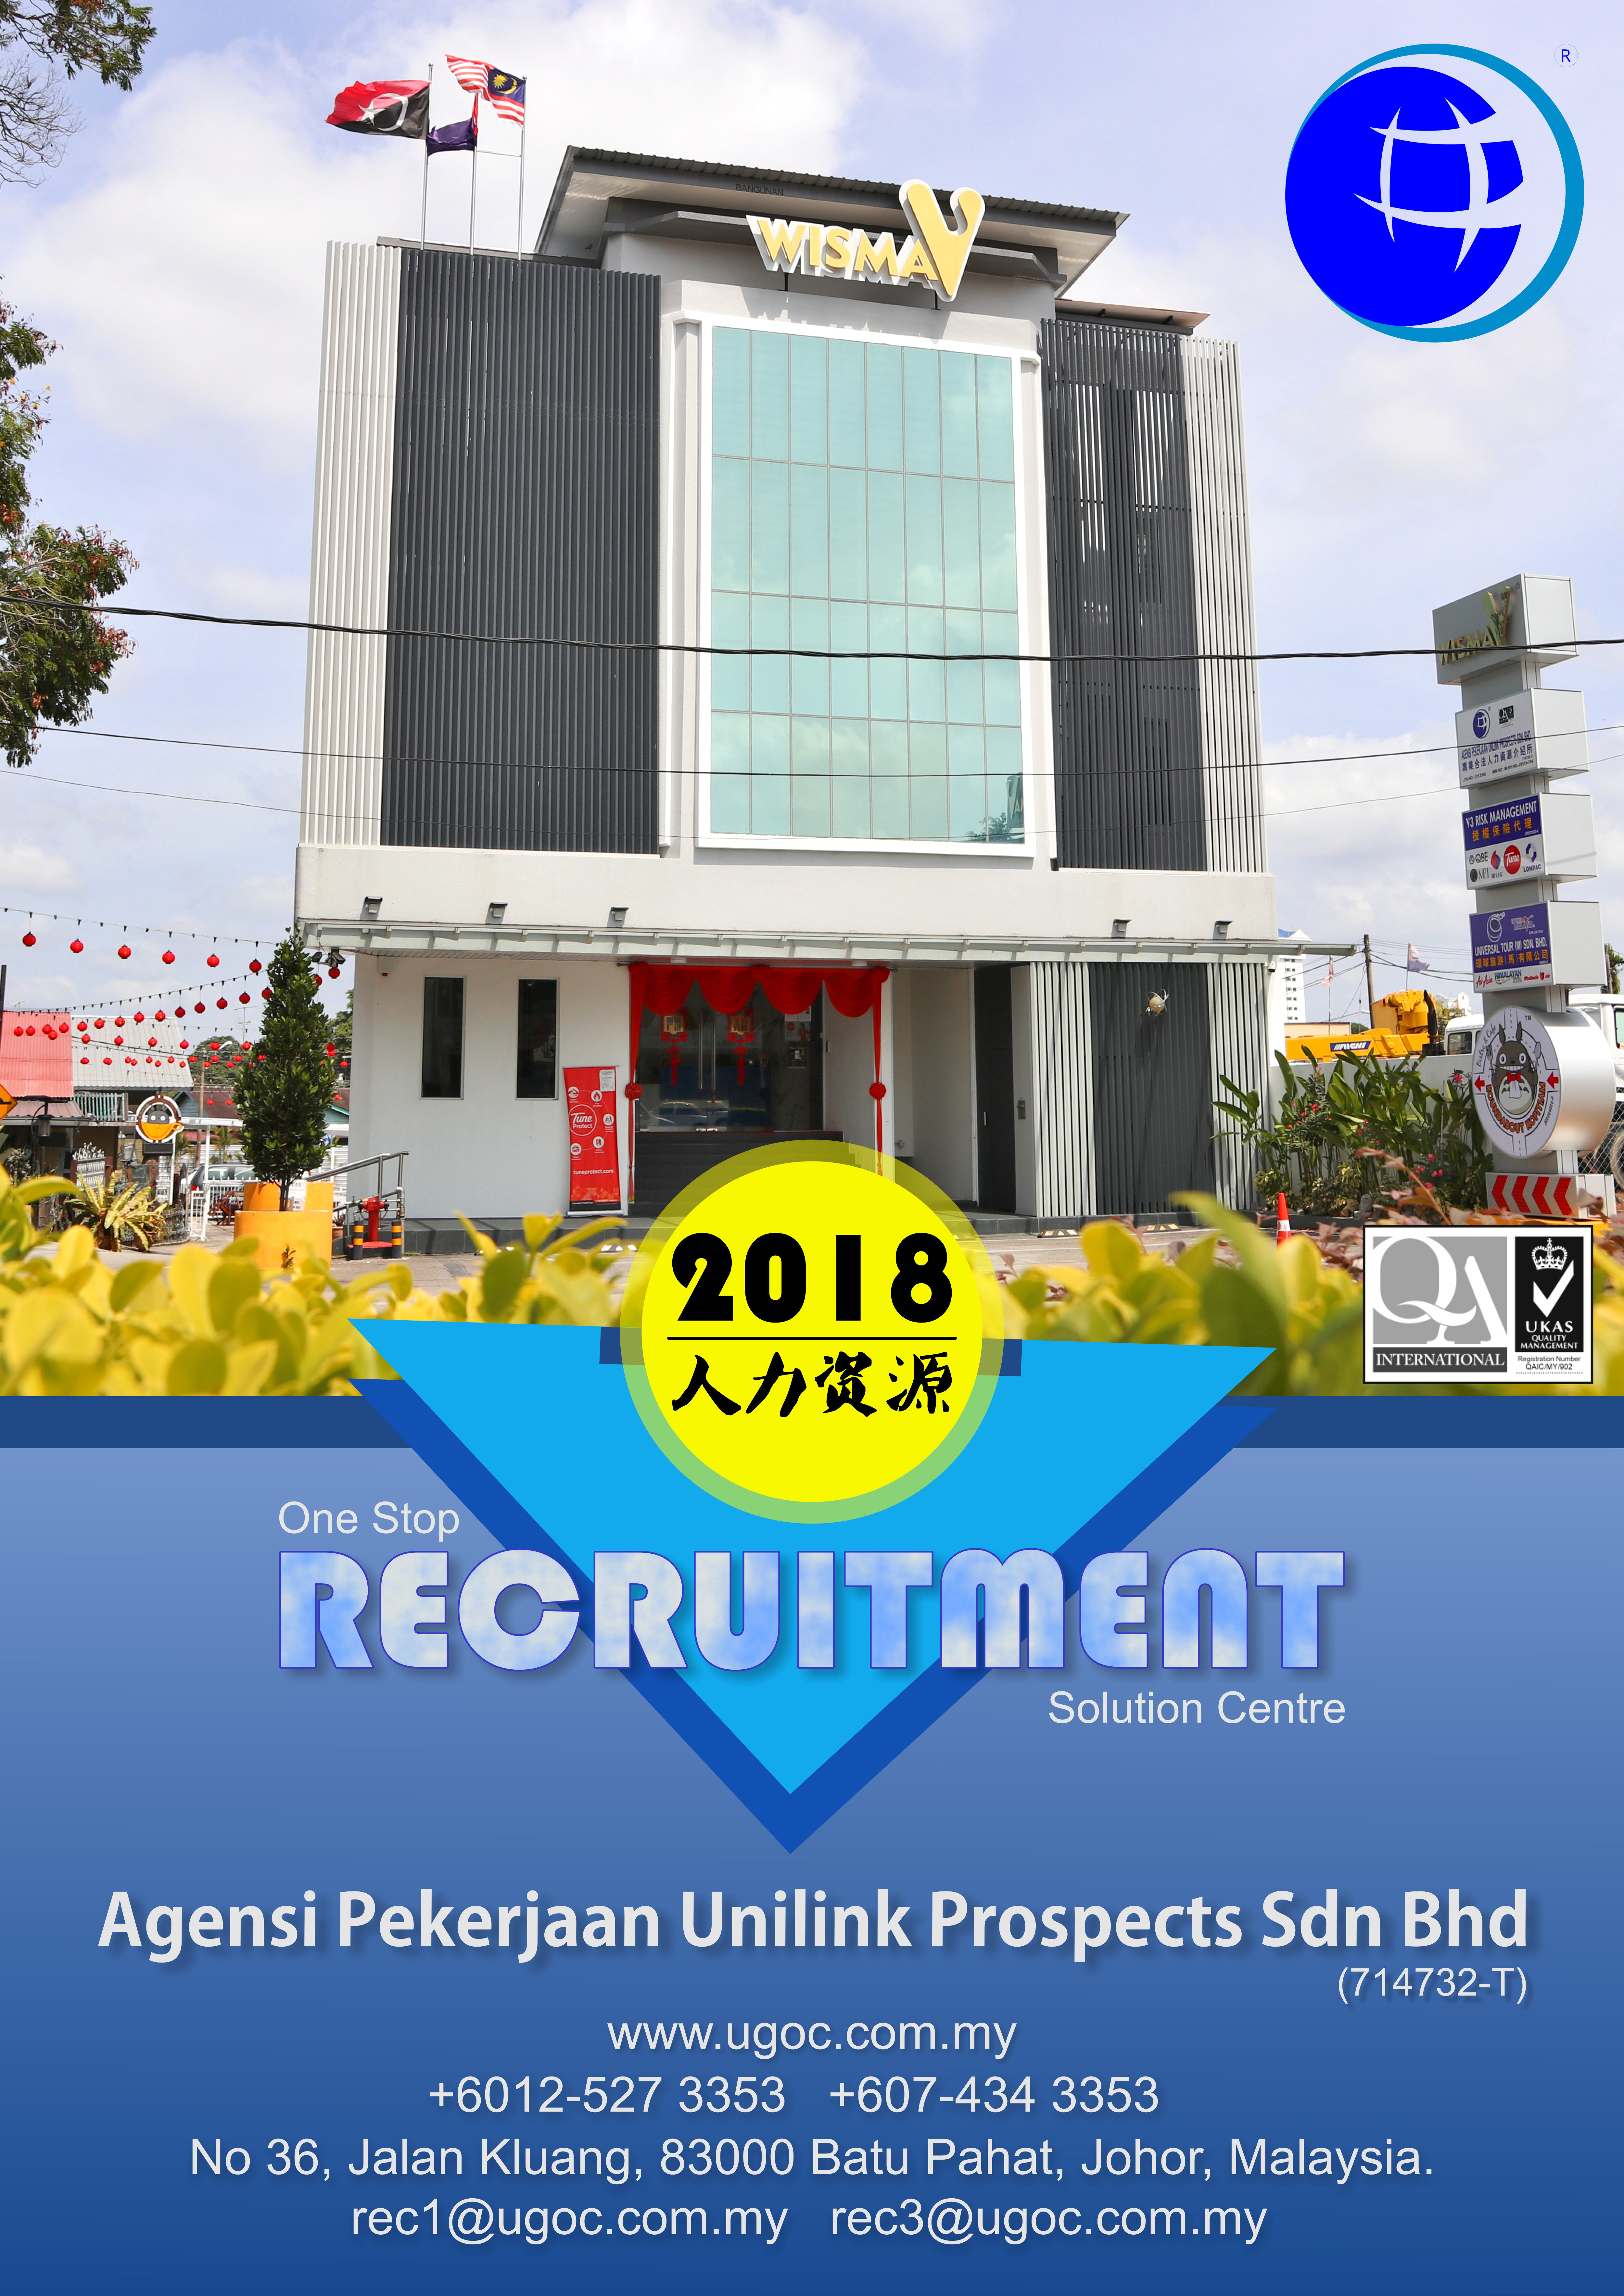 Agensi Pekerjaan Unilink Prospects Sdn Bhd Wisma V Malaysia Job Vacancy Manpower One Stap Recruitment Solution Centre Human Resources Local Placement Help in Company Development B01